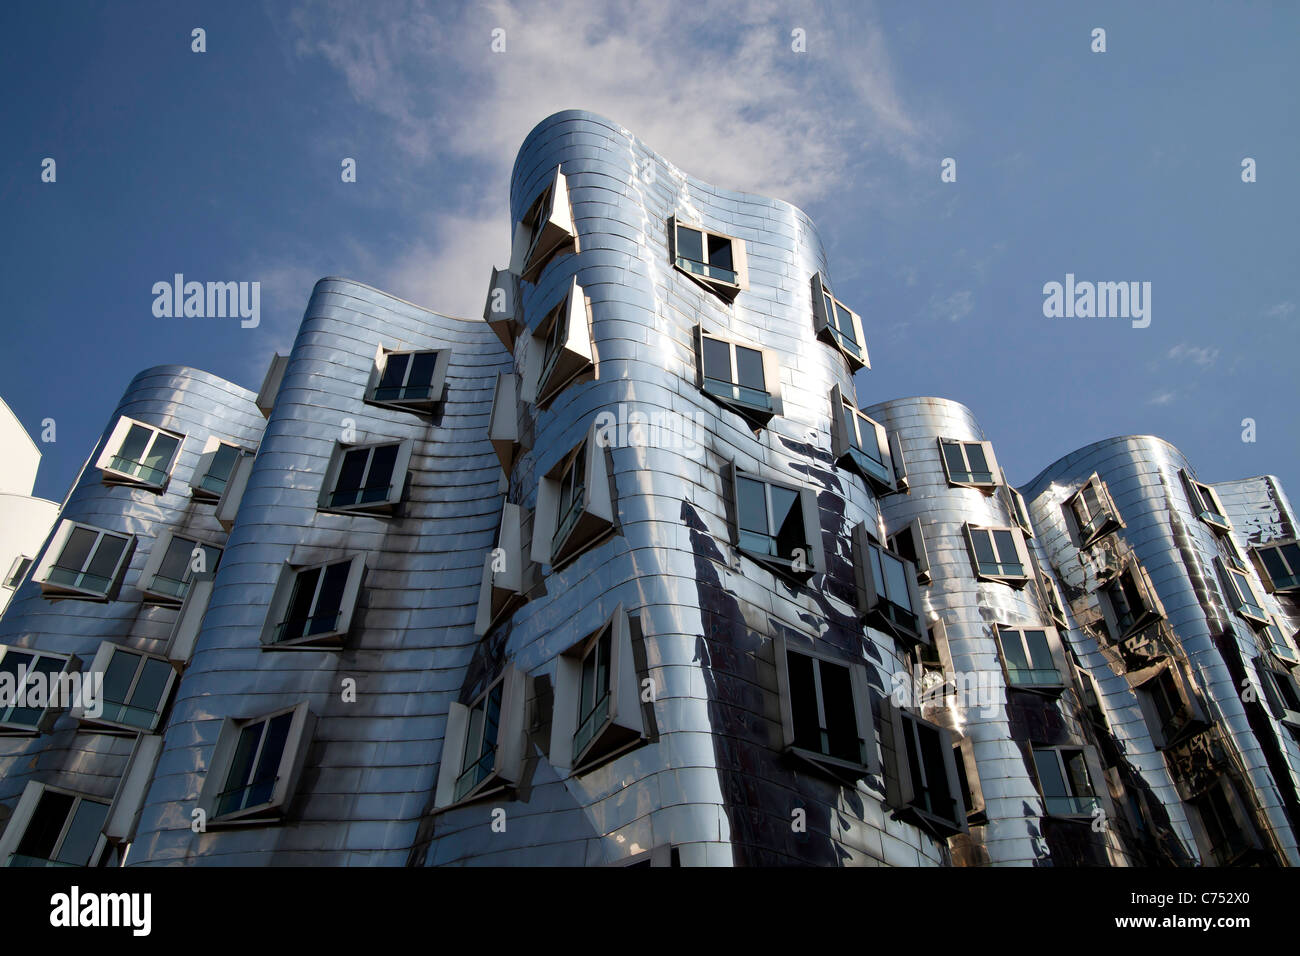 The Neue Zollhof  designed by  architect Frank O. Gehry of Media Harbor in  Duesseldorf,  Germany Stock Photo